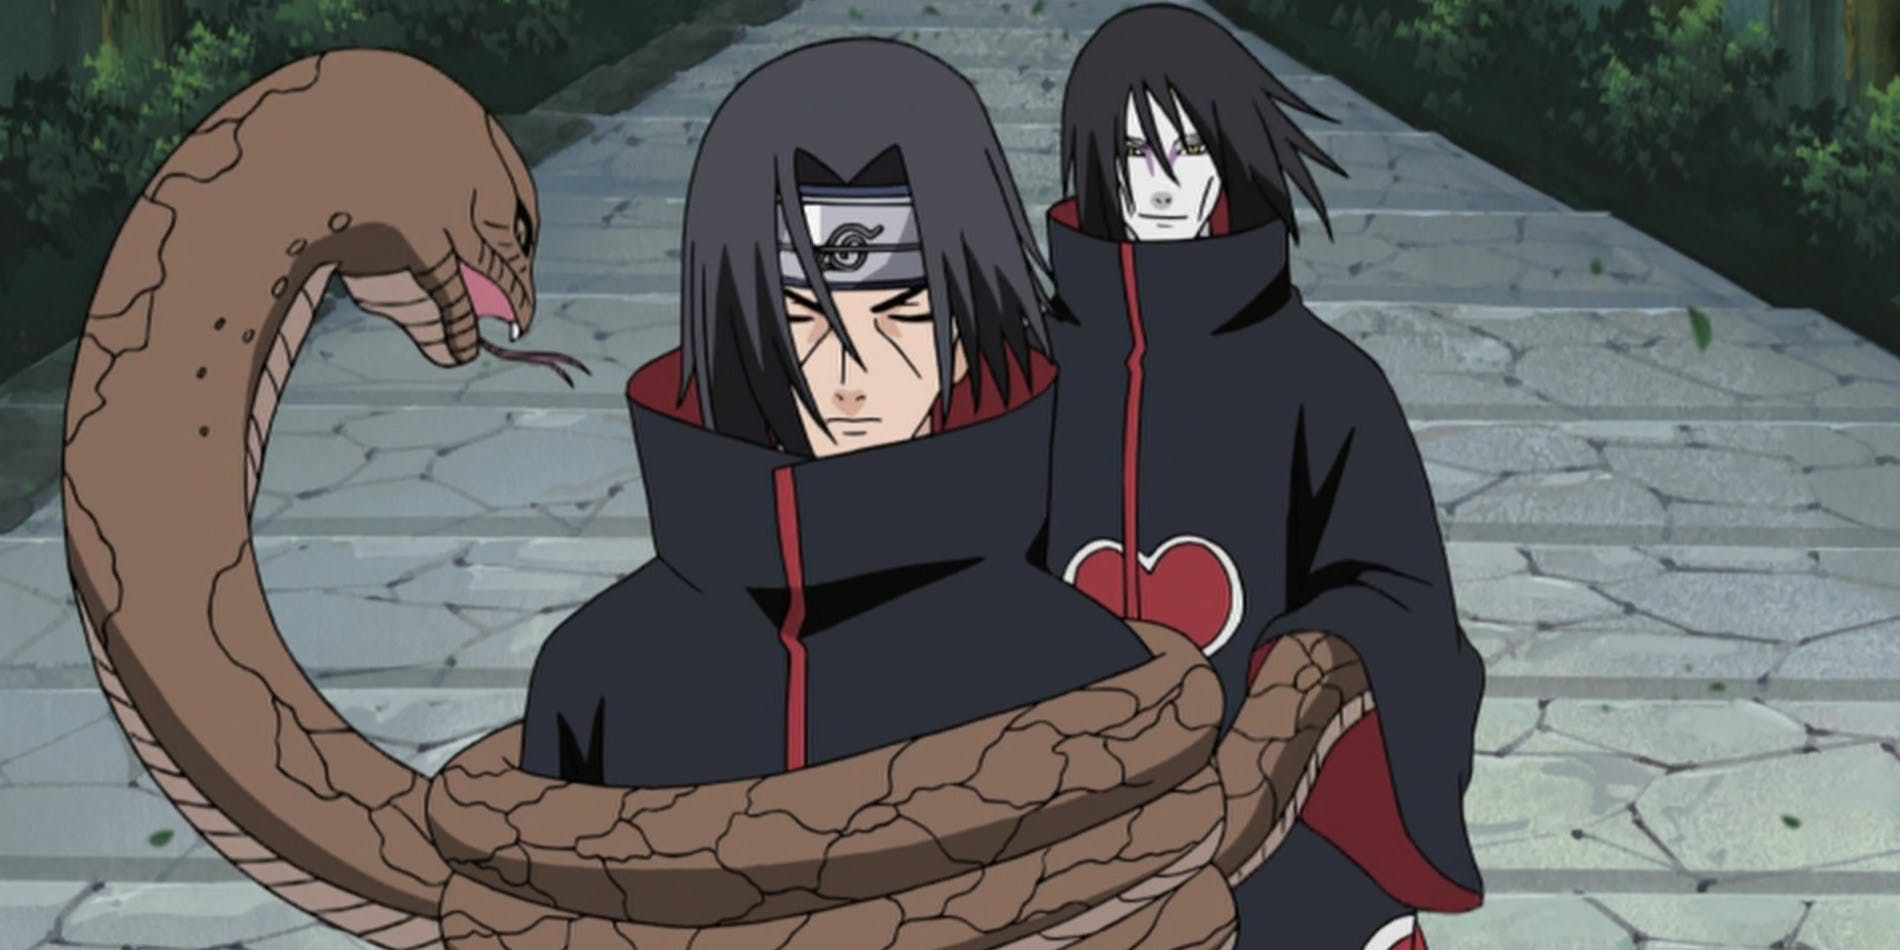 Itachi is surrounded by Orochimaru's snake while both wear Akatsuki robes in Naruto Shippuden